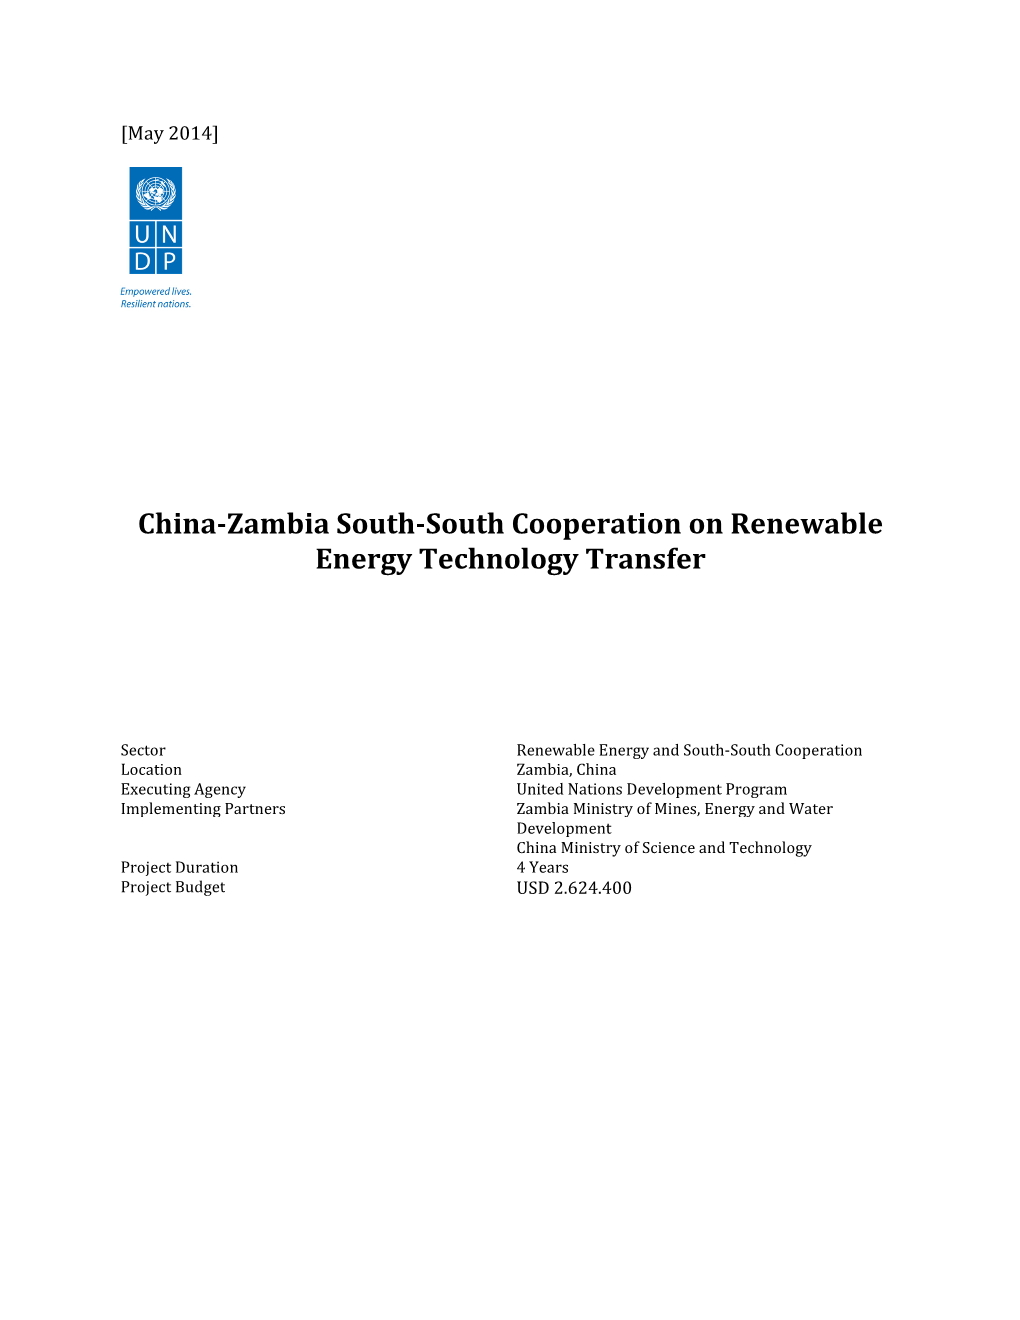 China-Zambia South-South Cooperation on Renewable Energy Technology Transfer